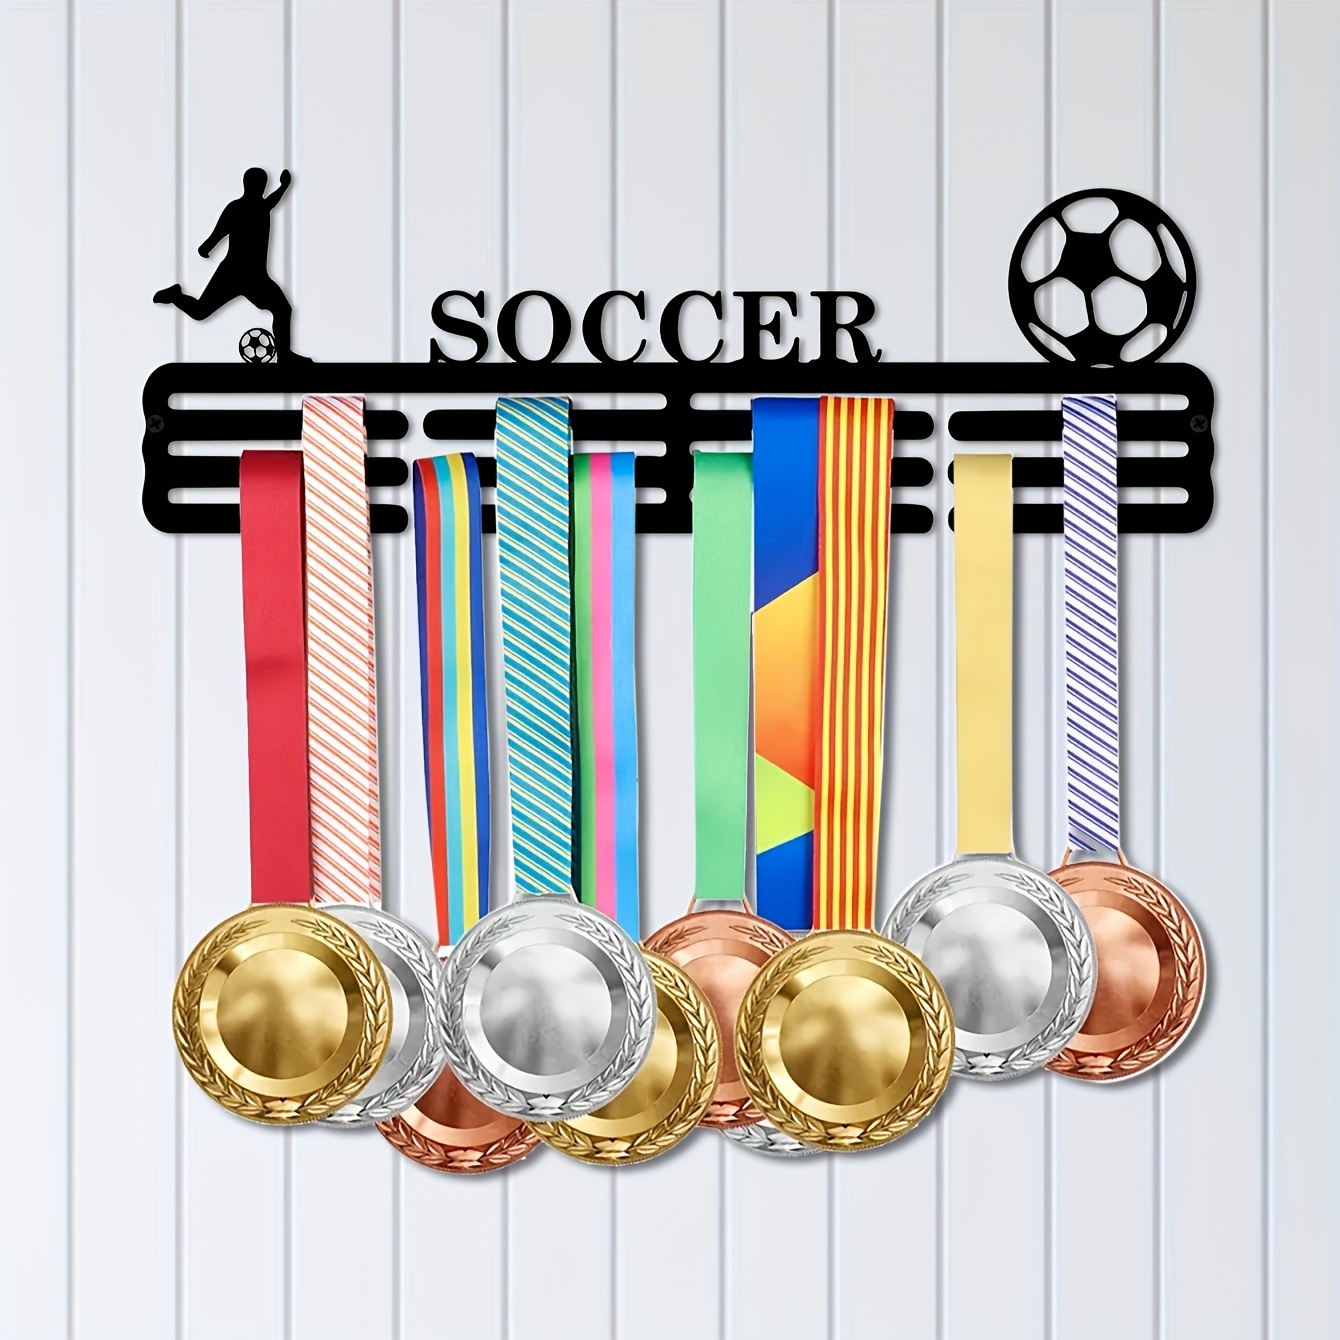 

Versatile Metal Medal Display Rack - 15.8" X 5.3" Wall-mounted Organizer For Sports Medals, Ideal For Football, Gymnastics, Cycling - Perfect For Living Room, Bedroom, Or Study Decor